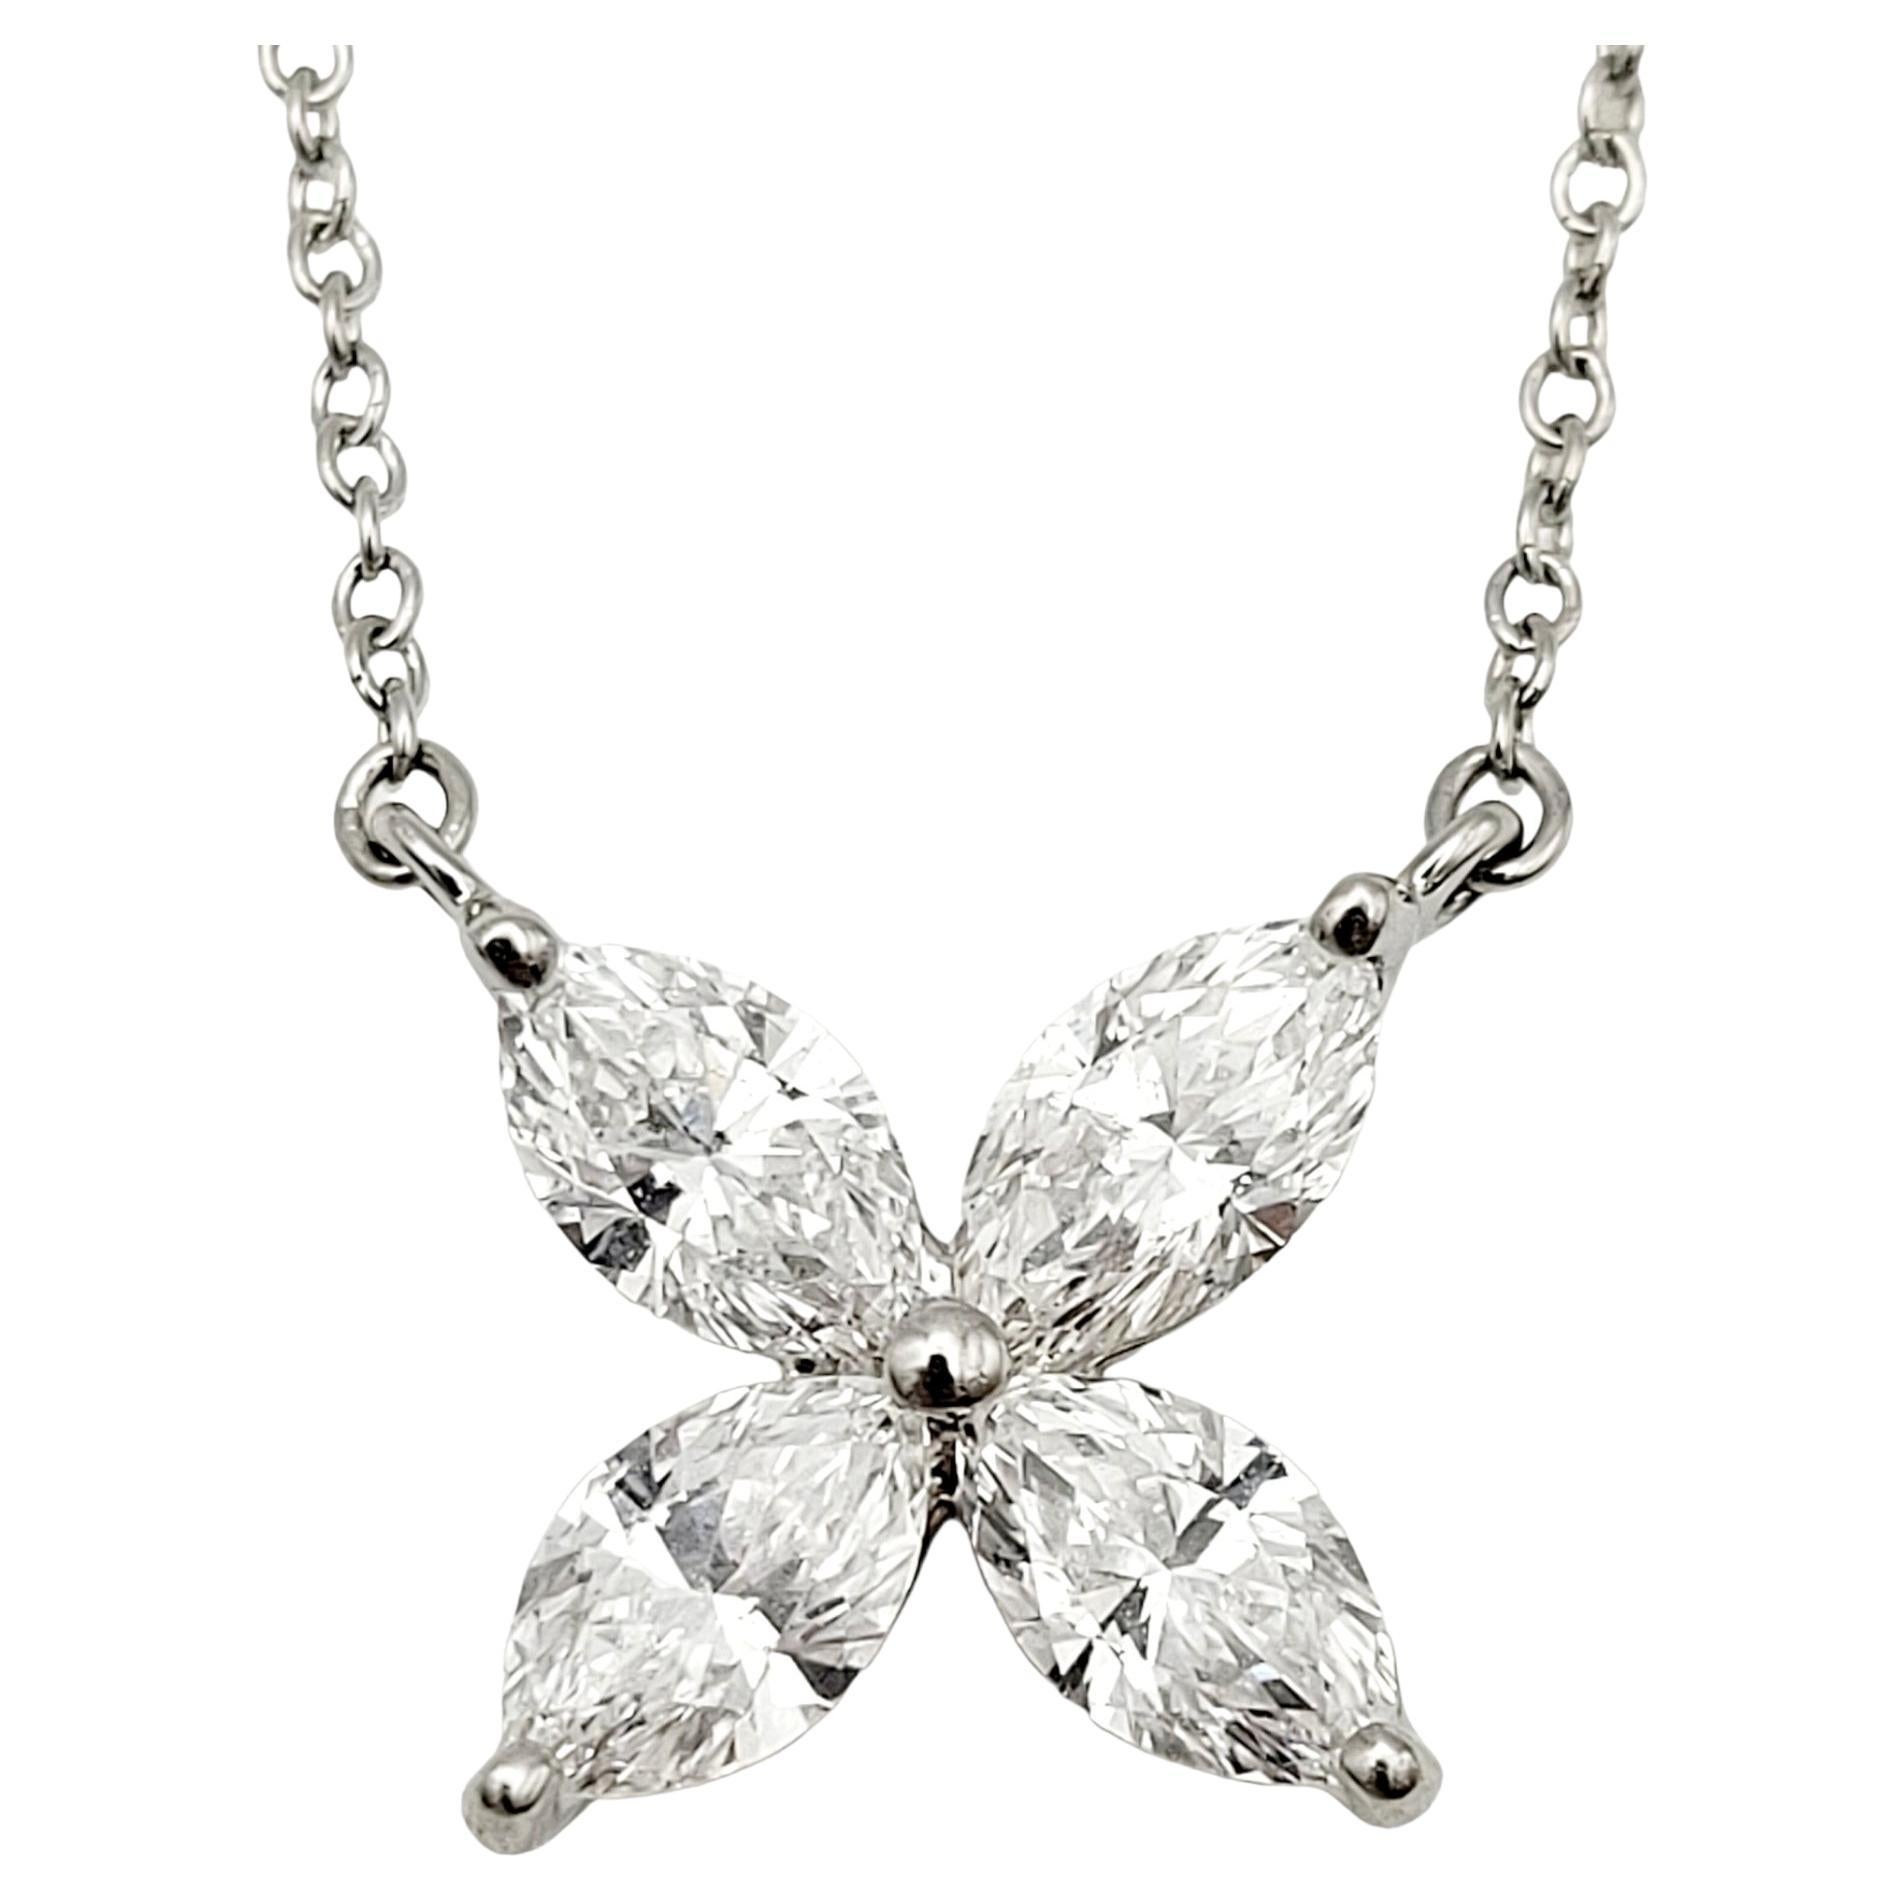 Tiffany & Co. Victoria Diamond .92 Carats Large Pendant Necklace in Platinum For Sale